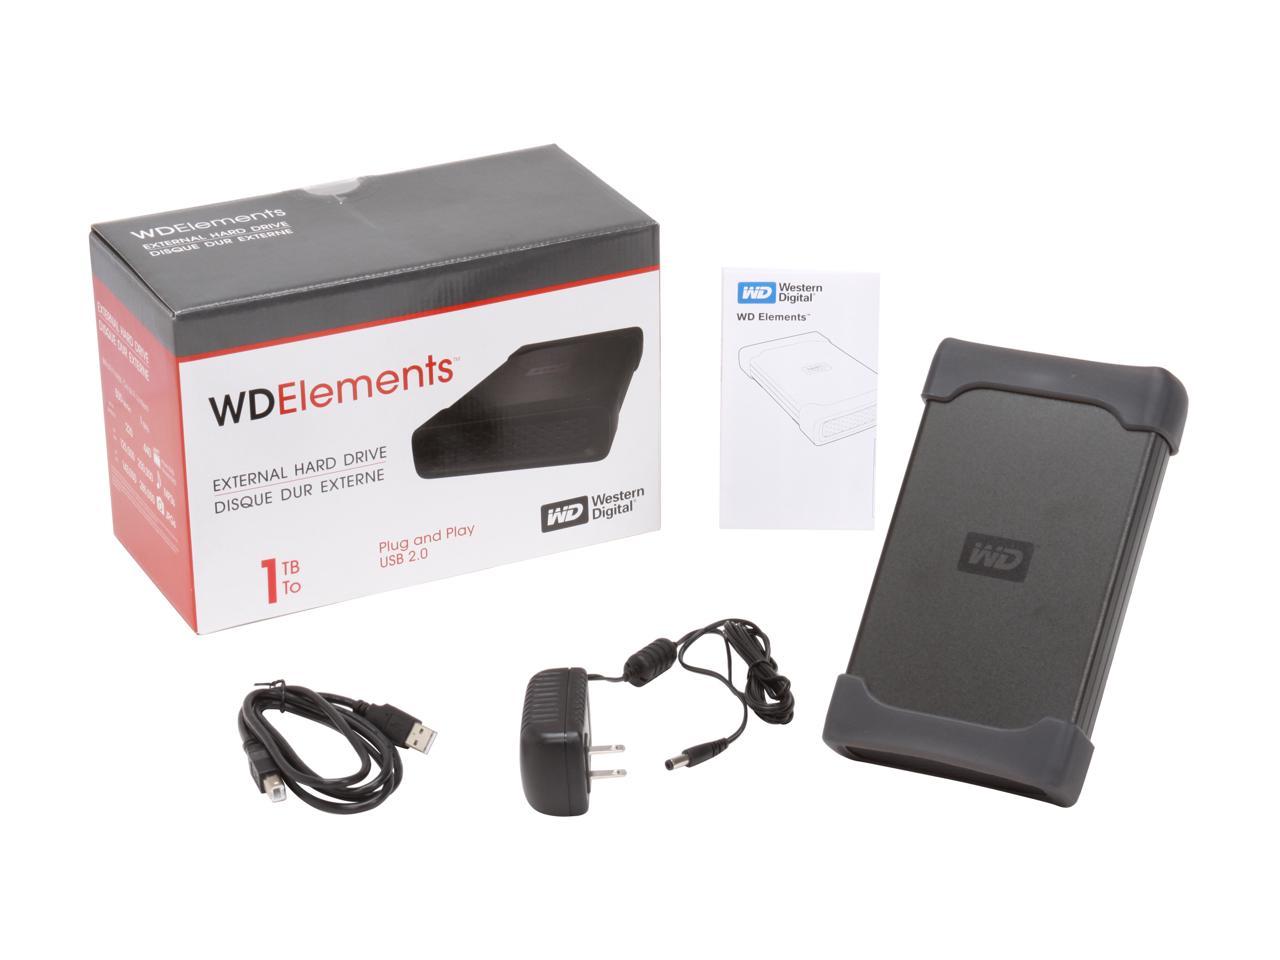 Western Digital WD Elements ENCLOSURE ONLY new external Hard Drive Case PC MAC 